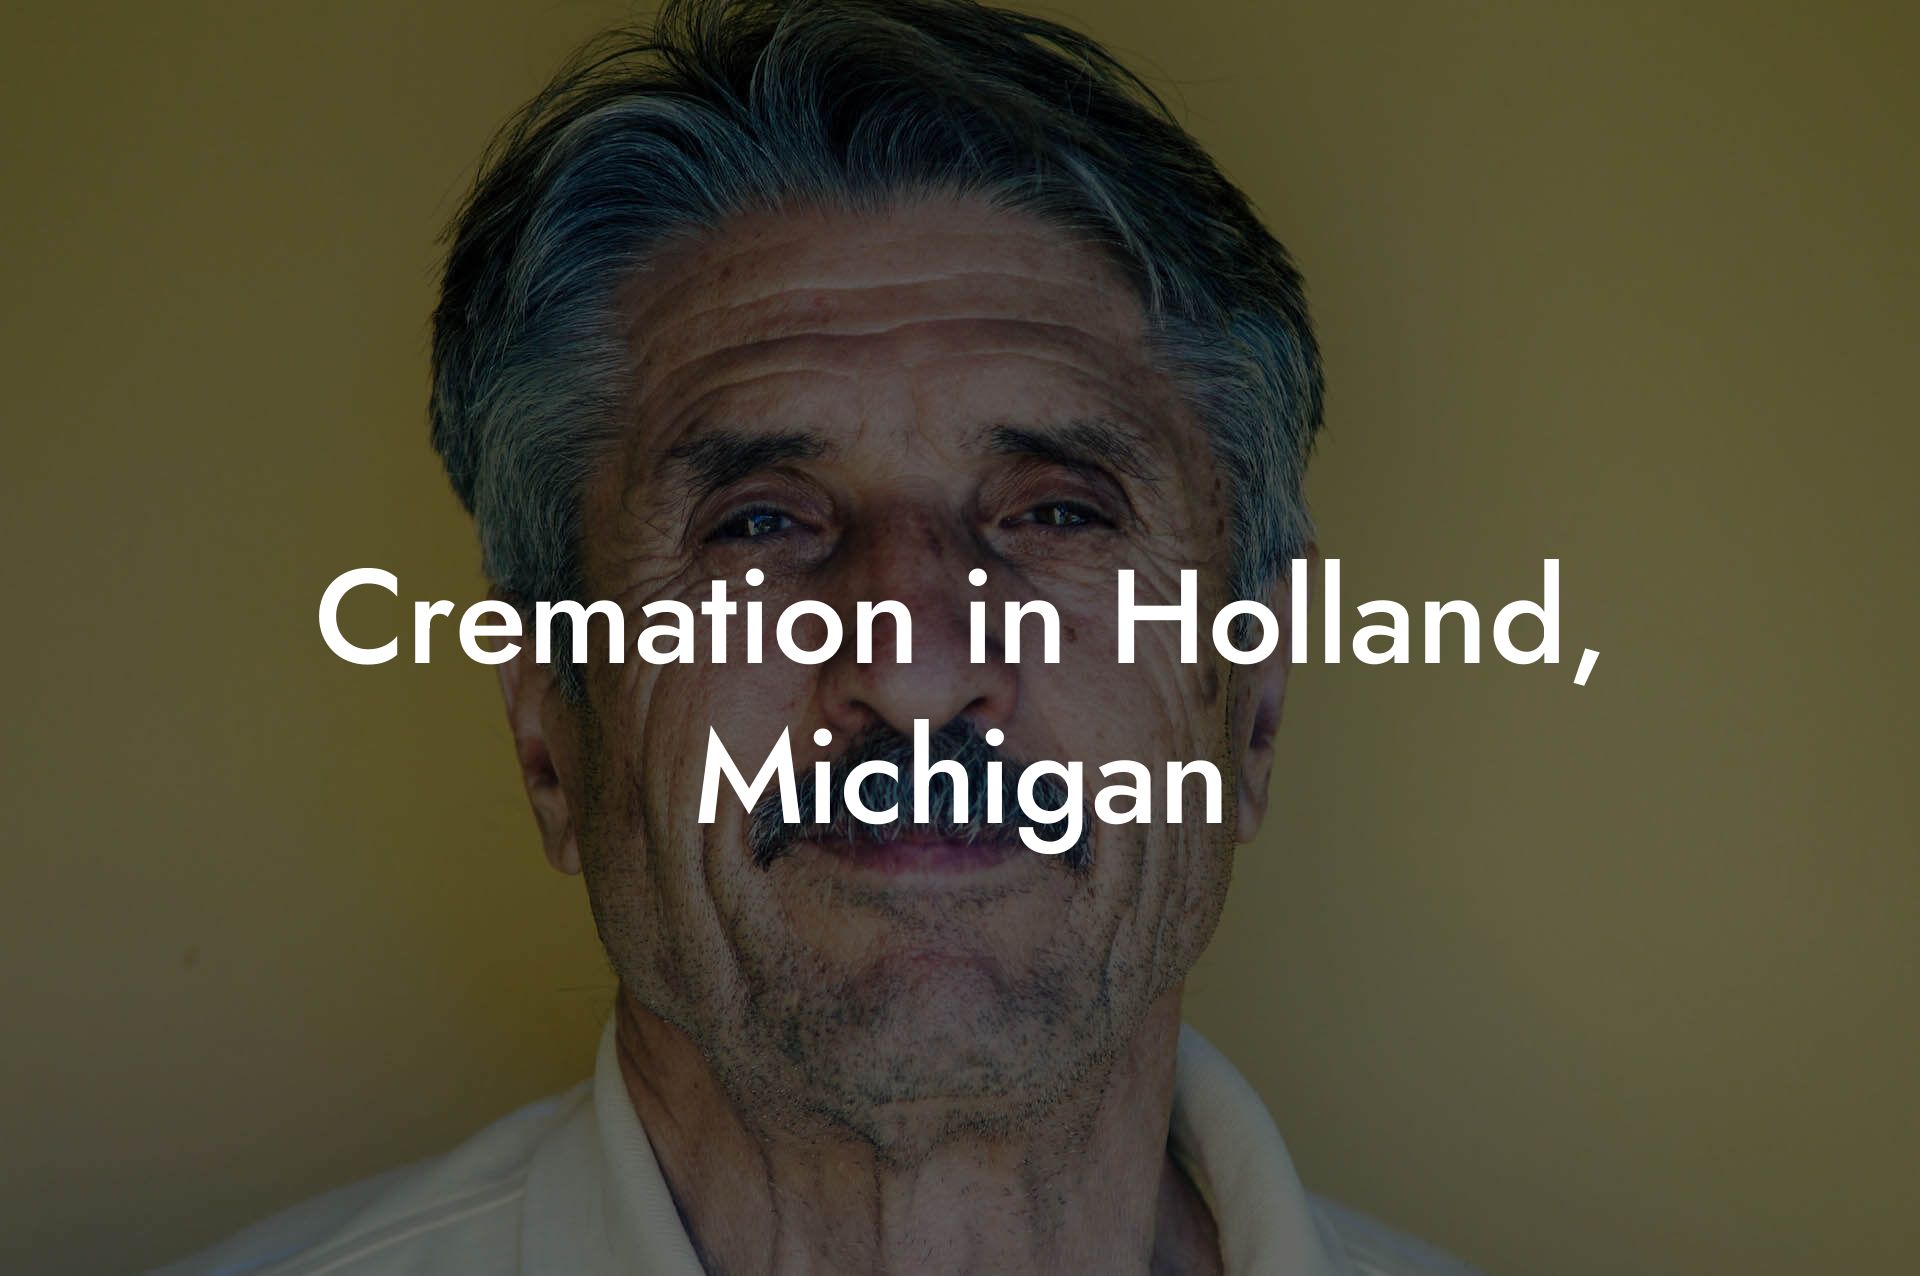 Cremation in Holland, Michigan